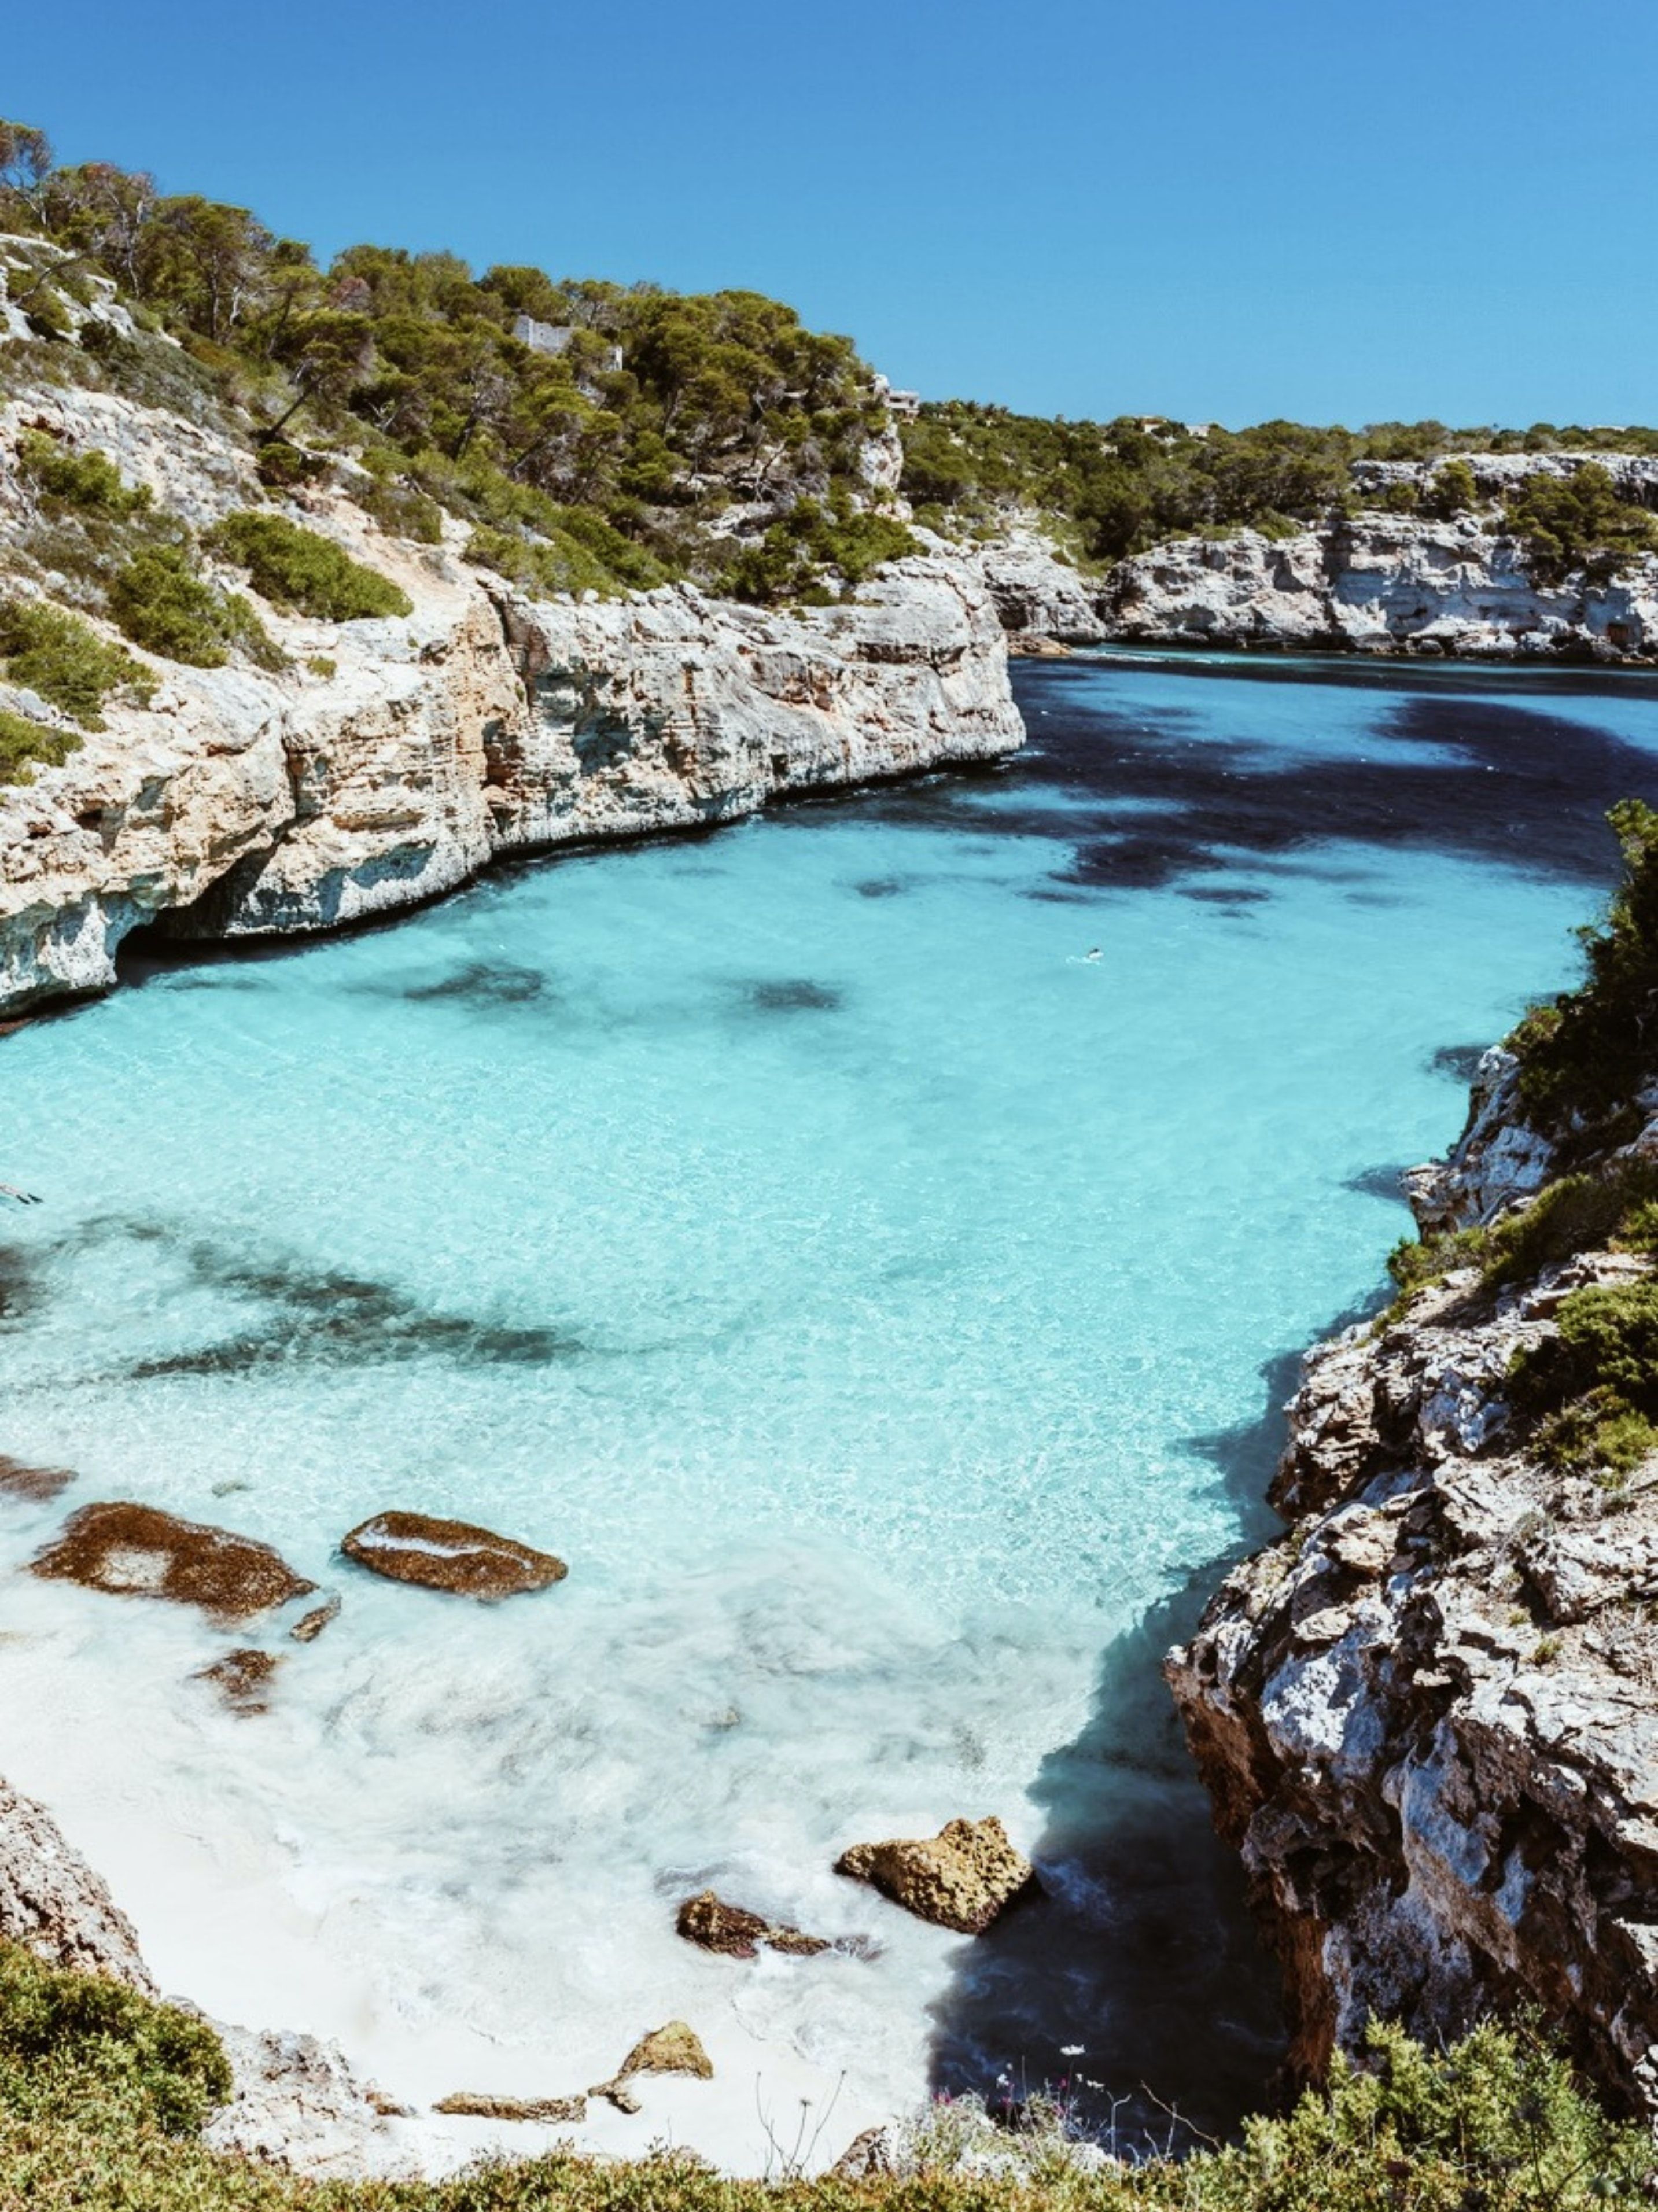 A stunning cove and white sand beach with turquoise ocean in Mallorca, Spain